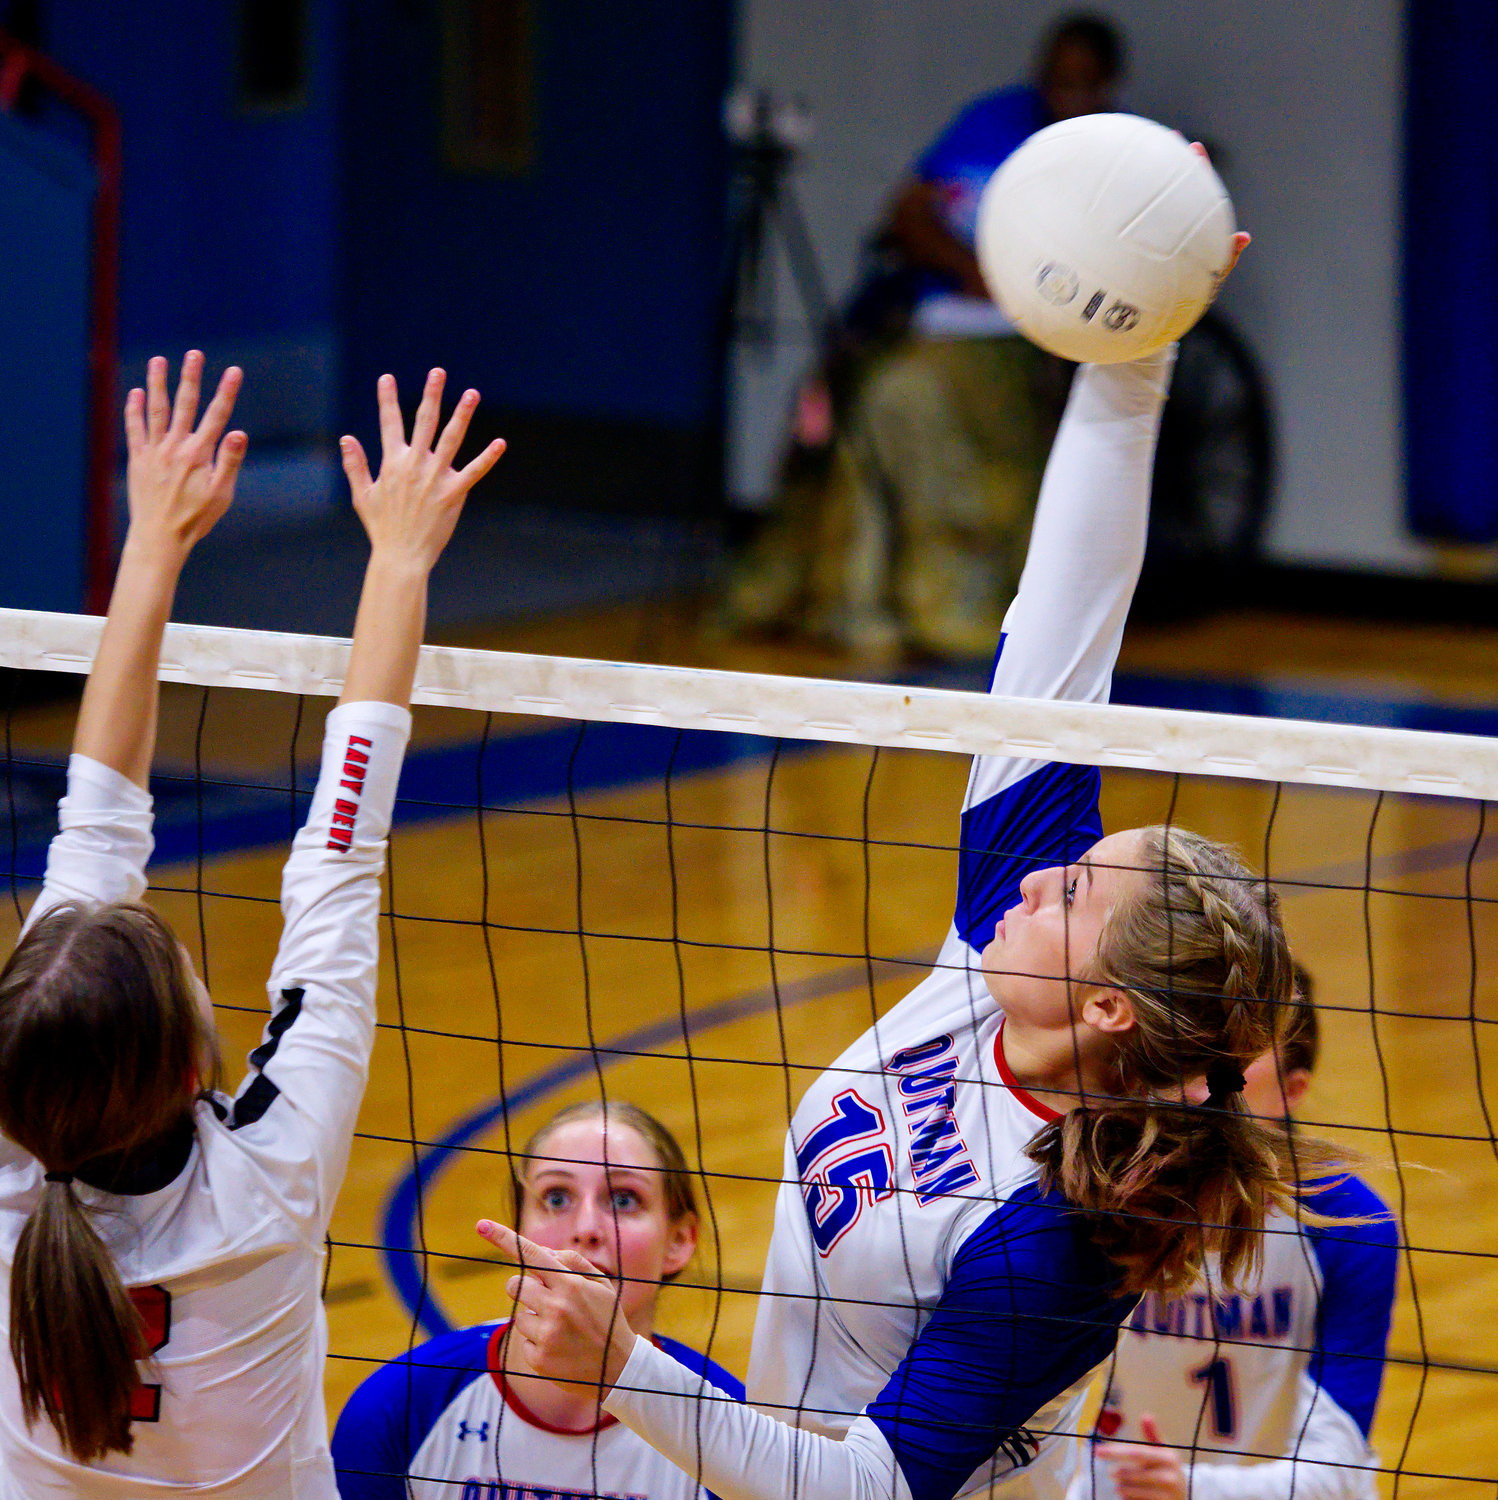 Annabelle Popek slams a spike for Quitman. [view more volleyball shots]